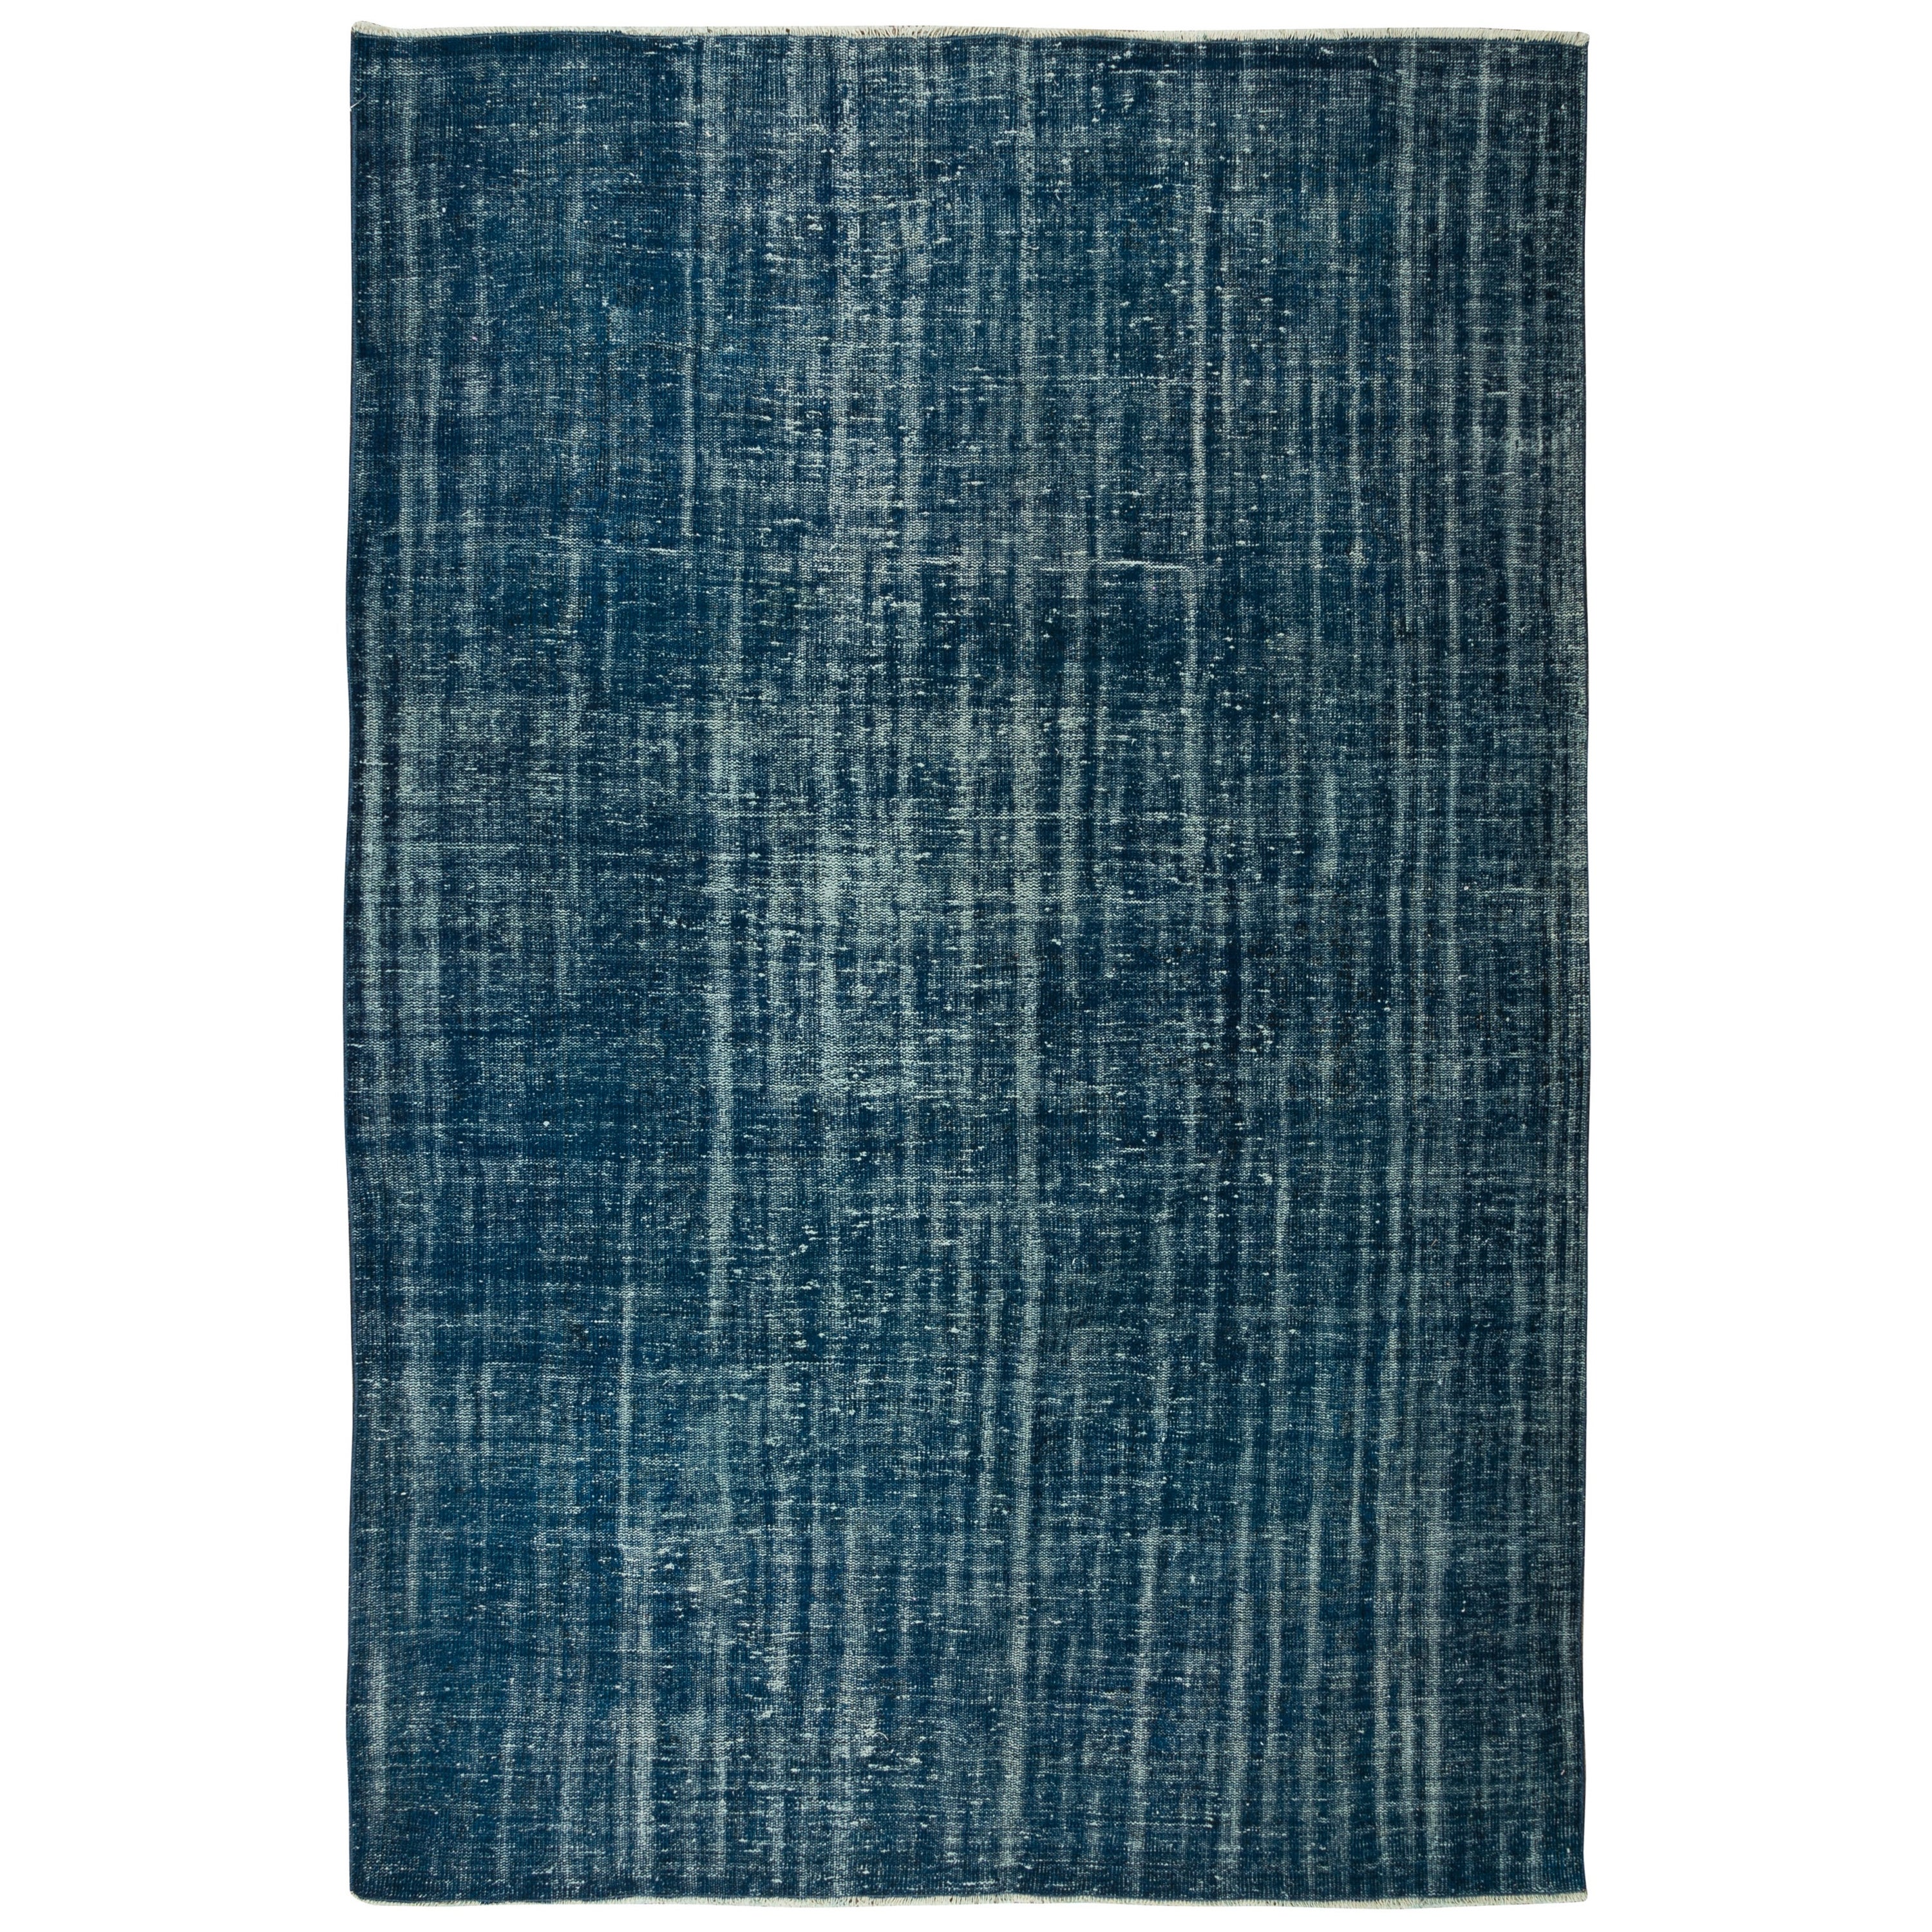 7x10.3 Ft Modern Home Decor Handmade Turkish Wool Area Rug in Navy Blue For Sale